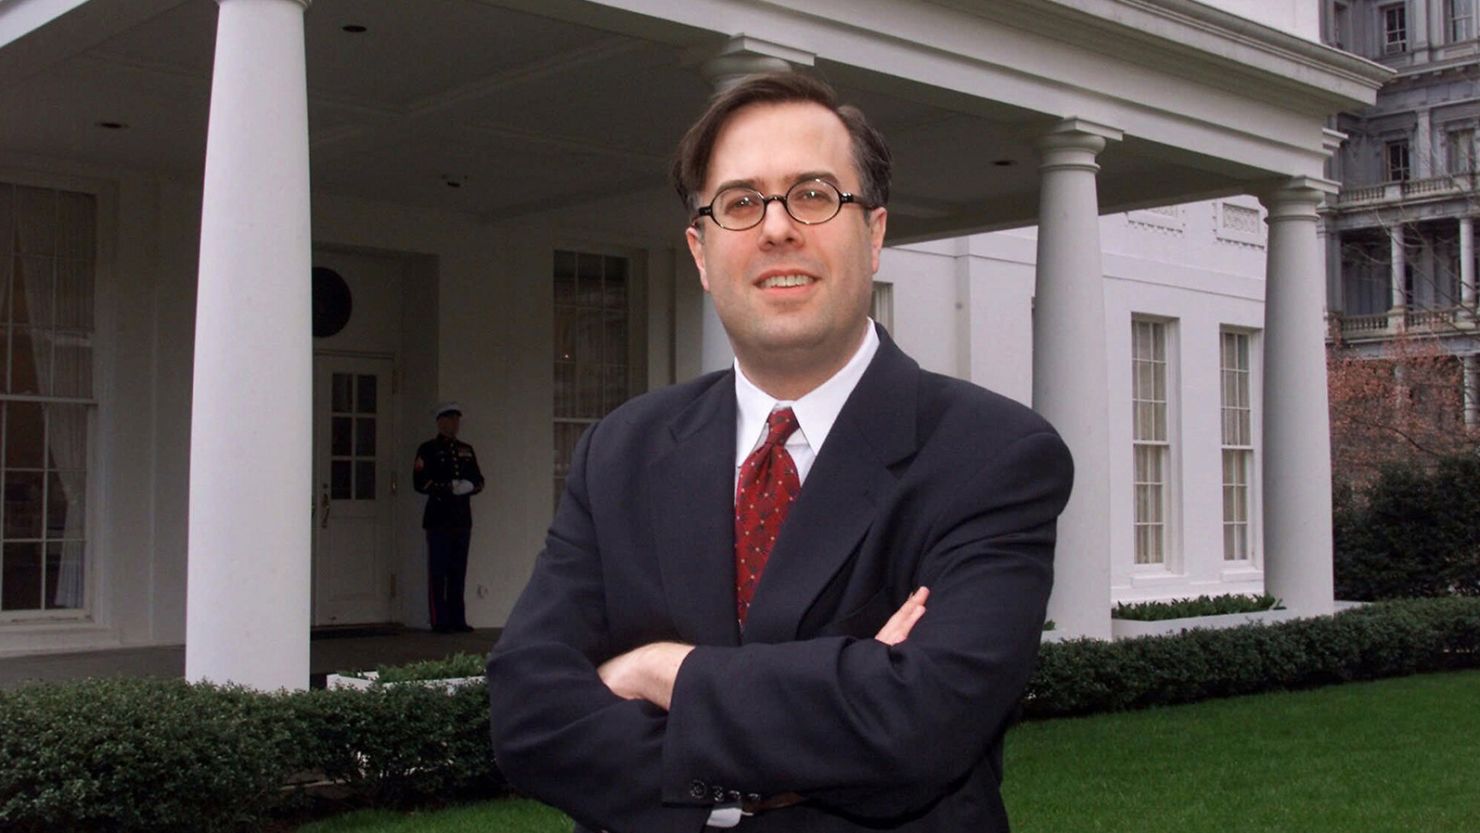 Michael Gerson poses in front of the West Wing of the White House in this March 30, 2001, file photo.